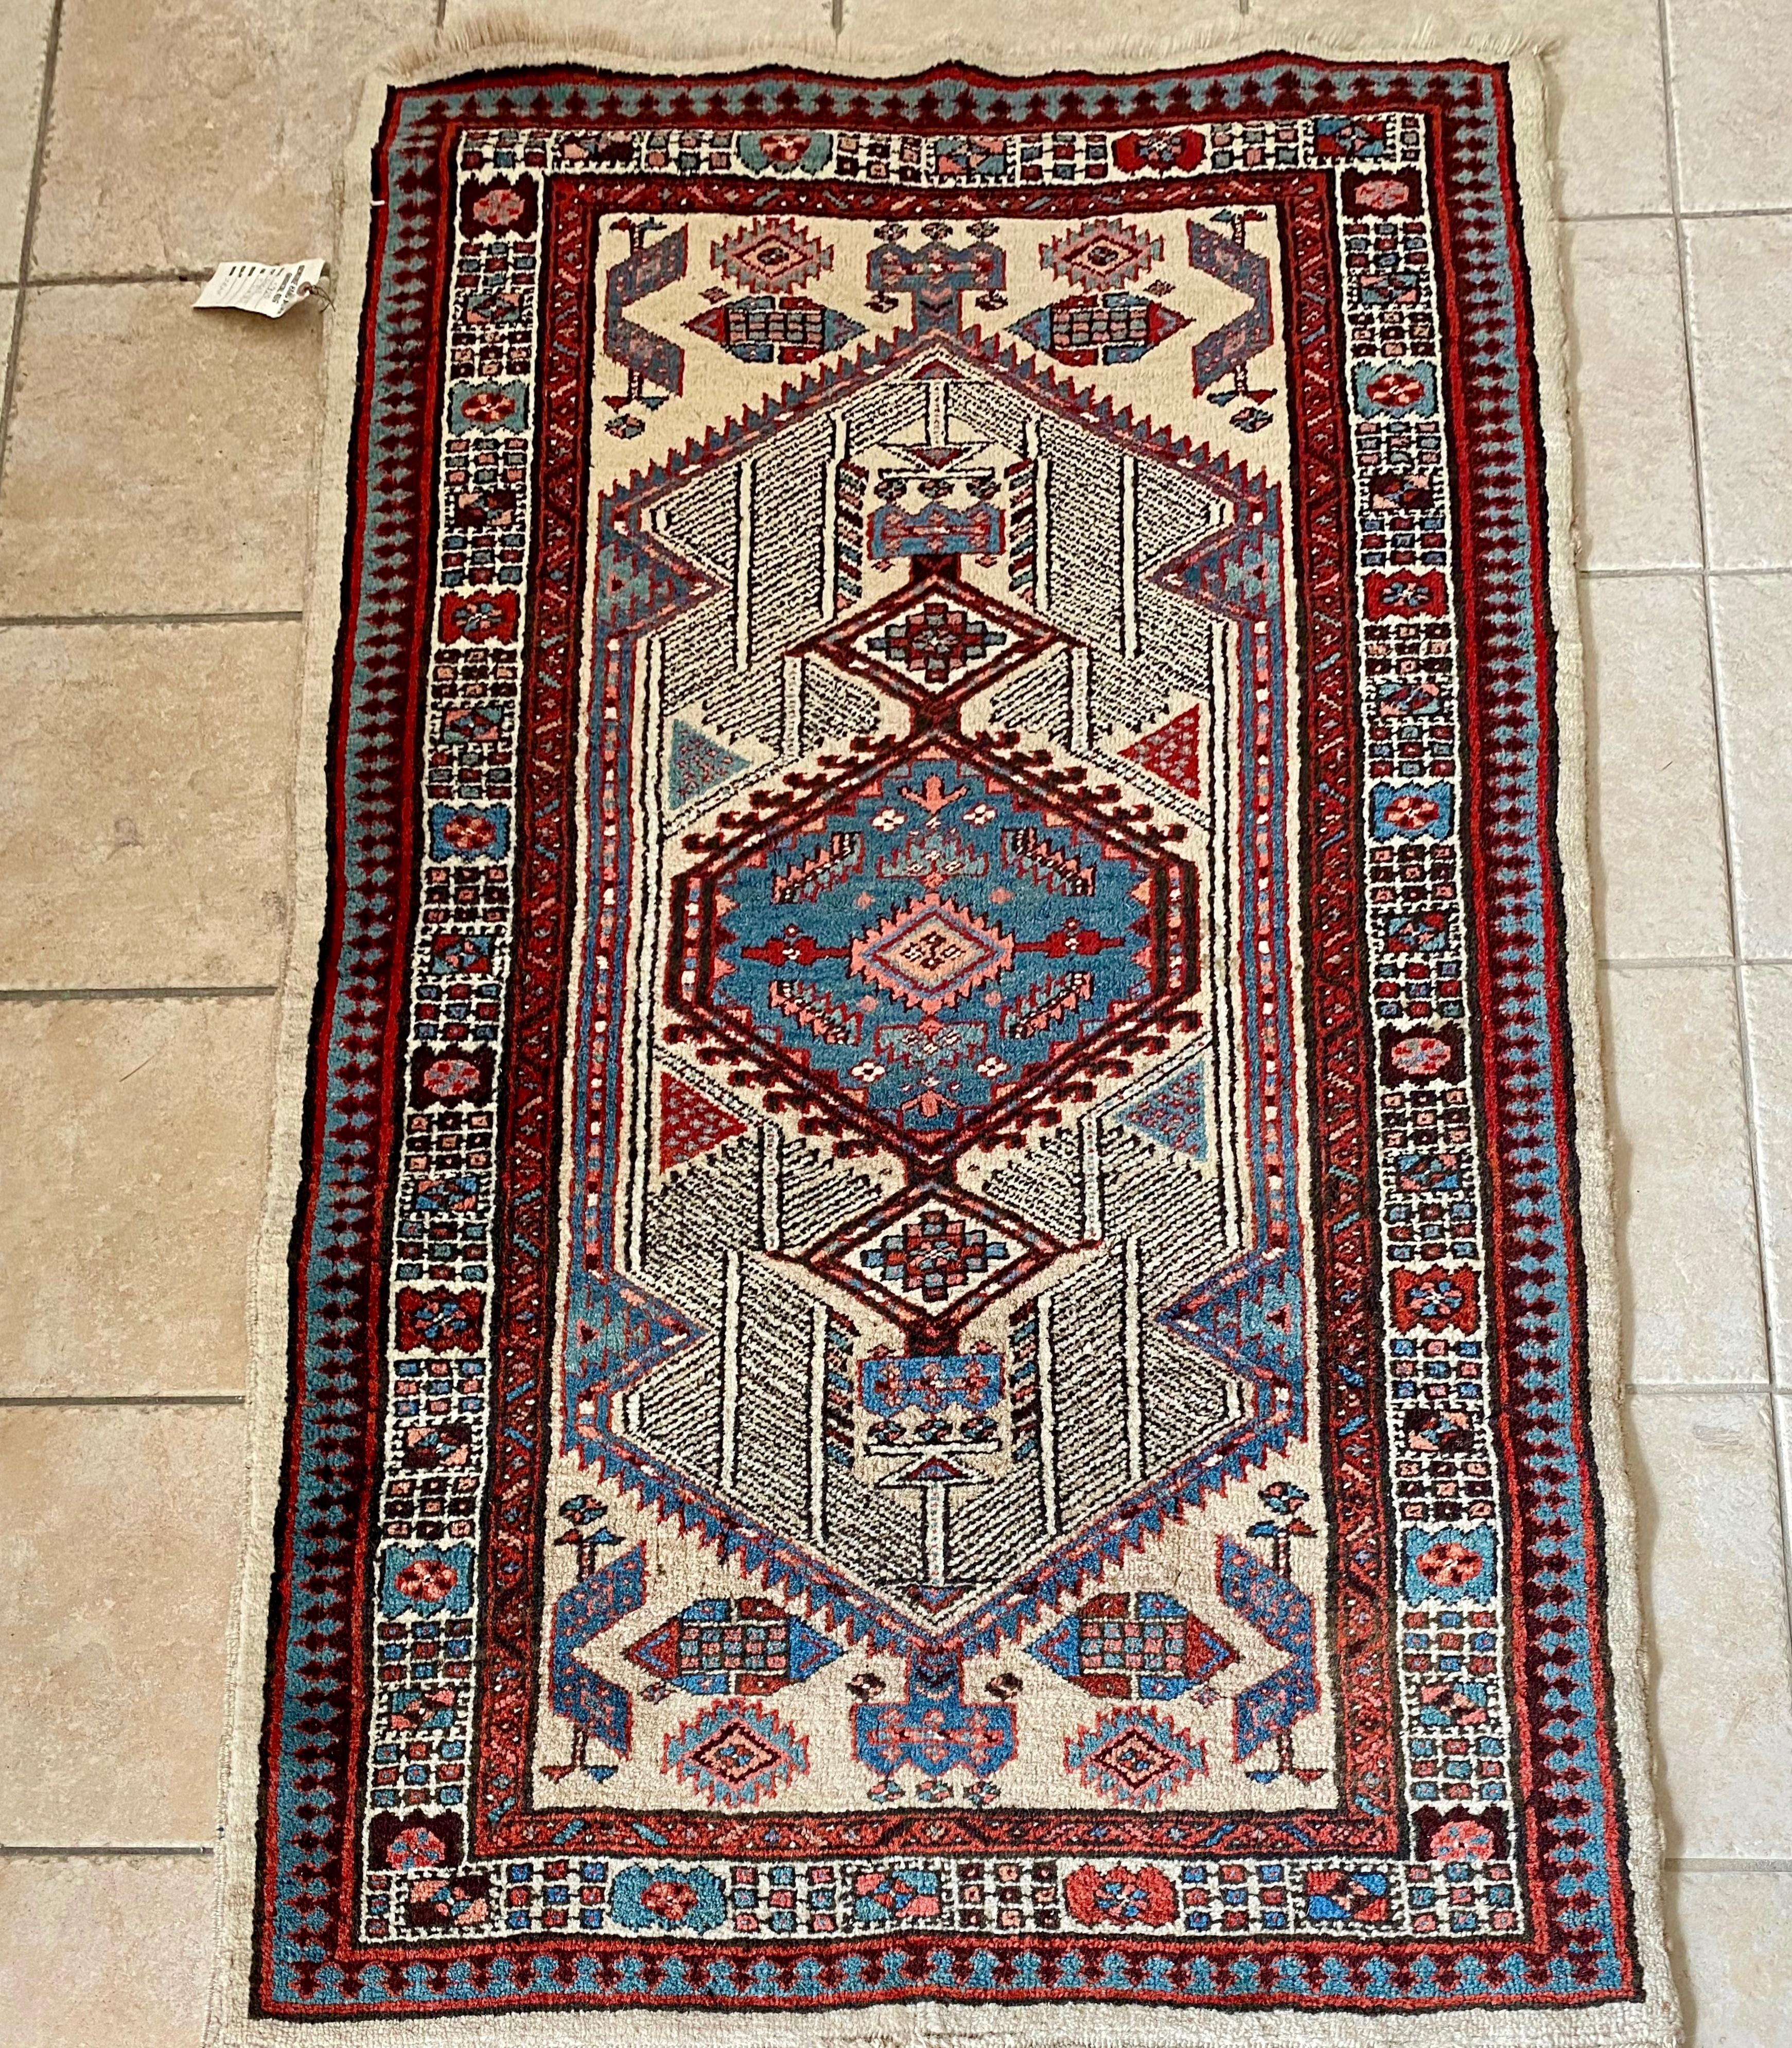 This is a lovely pair of antique Persian Sarab rugs from the 1960s and each piece measures 3.2 x 5.5 ft. the pair is in excellent condition.

Sarab or Serab is a small village situated in Northwest Iran where a tribe of weavers specialized in